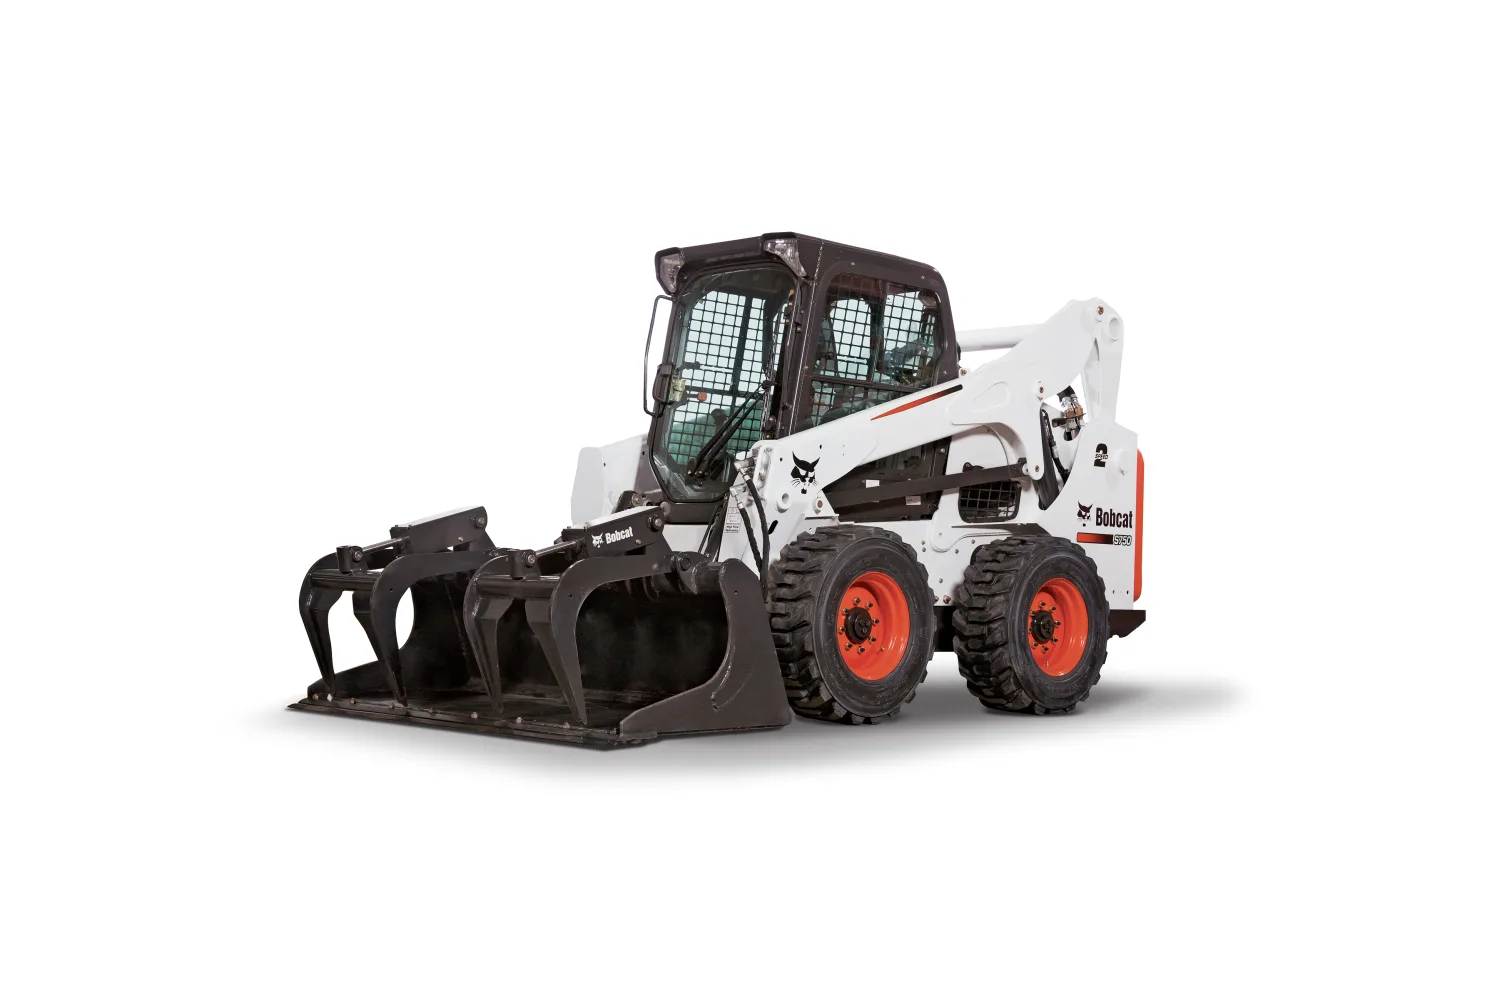 Browse Specs and more for the Bobcat S750 Skid-Steer Loader - Bobcat of North Texas